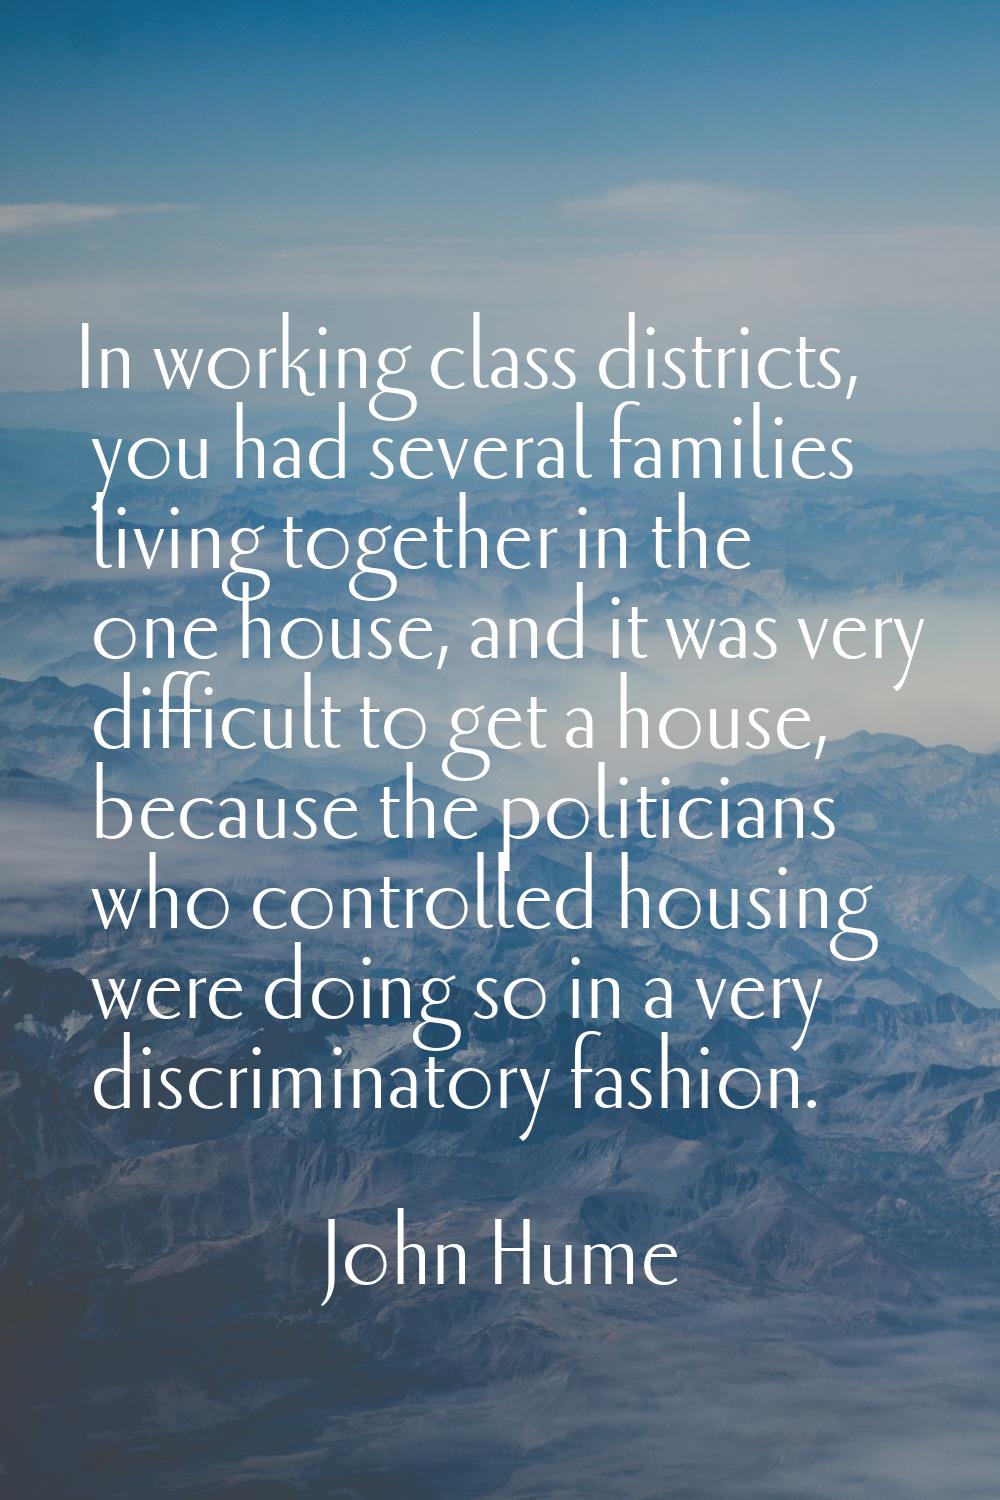 In working class districts, you had several families living together in the one house, and it was v